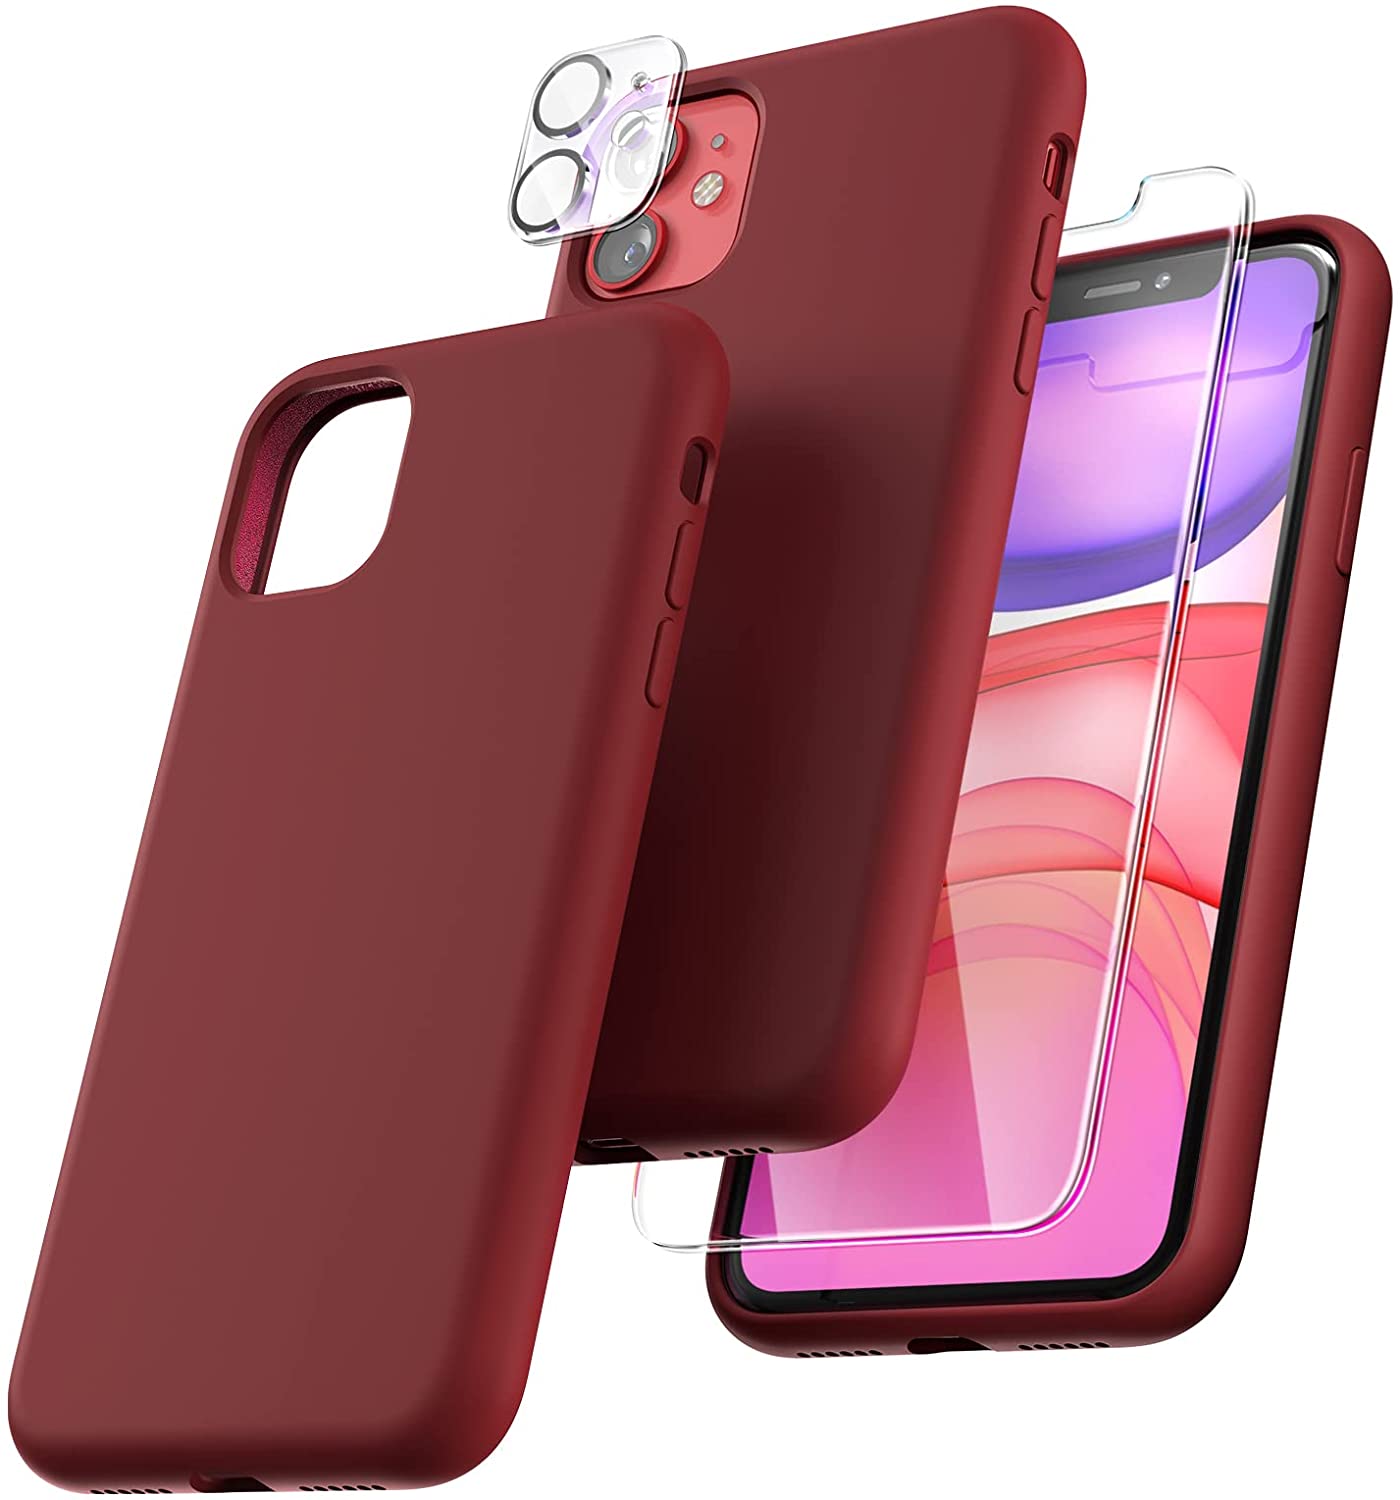 TOCOL [5 in 1 Designed for iPhone 11 Case, with 2 Pack Screen Protector + 2 Pack Camera Lens Protector, Liquid Silicone Slim Shockproof Cover [Anti-Scratch] [Drop Protection], Plum